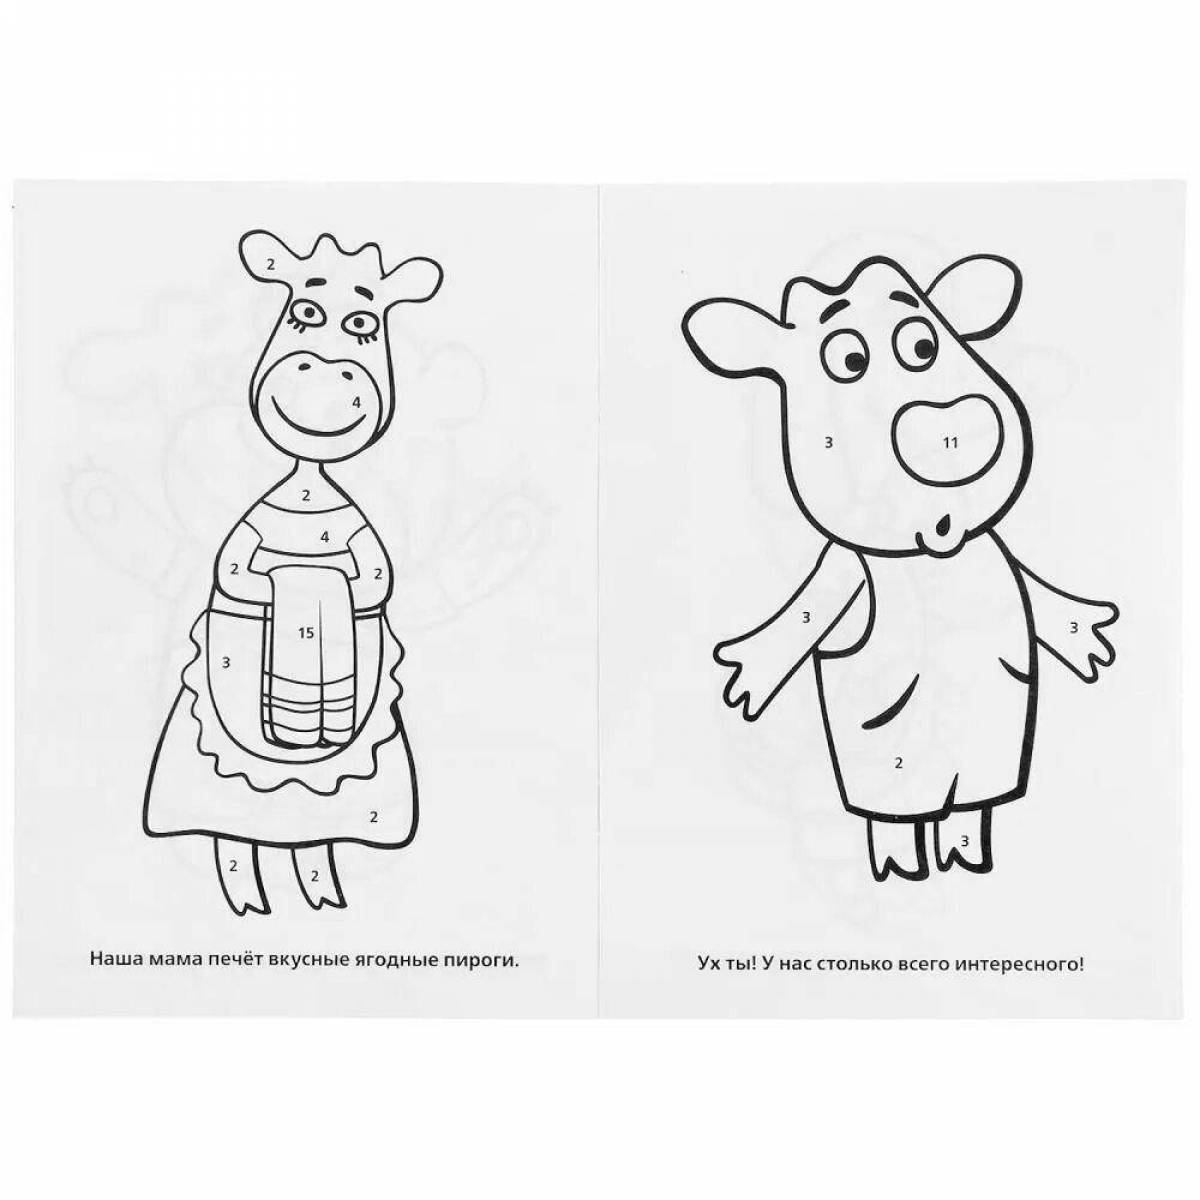 A funny orange cow coloring book for kids